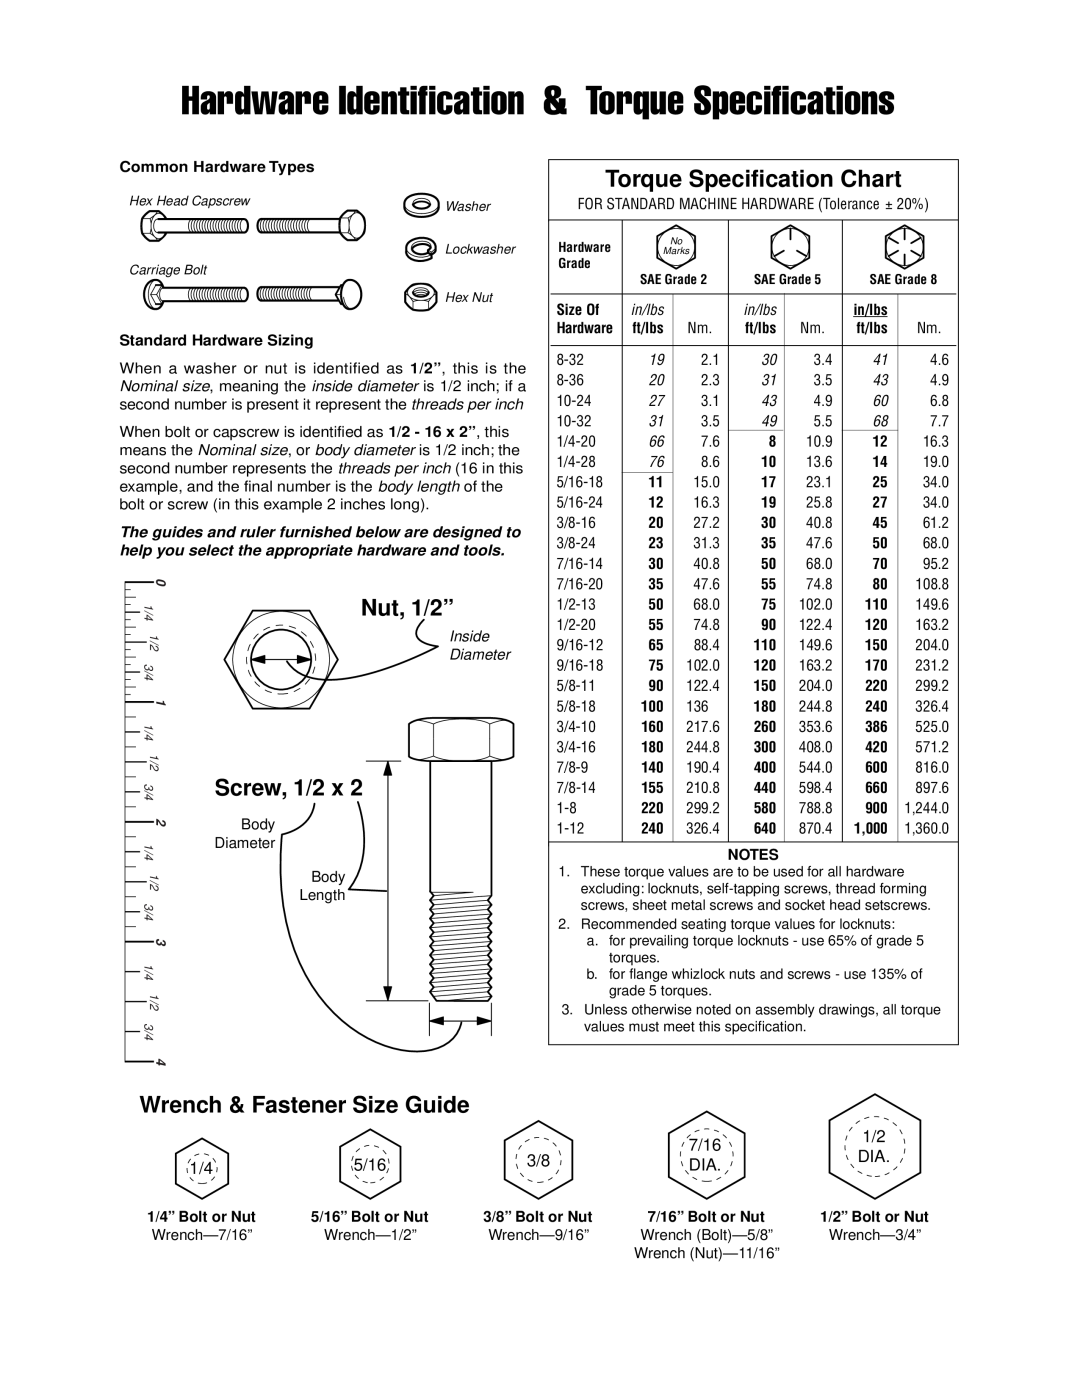 Simplicity TP 400-4284-01-HZ-S Wrench & Fastener Size Guide, Hardware Identification & Torque Specifications, Nut, 1/2” 